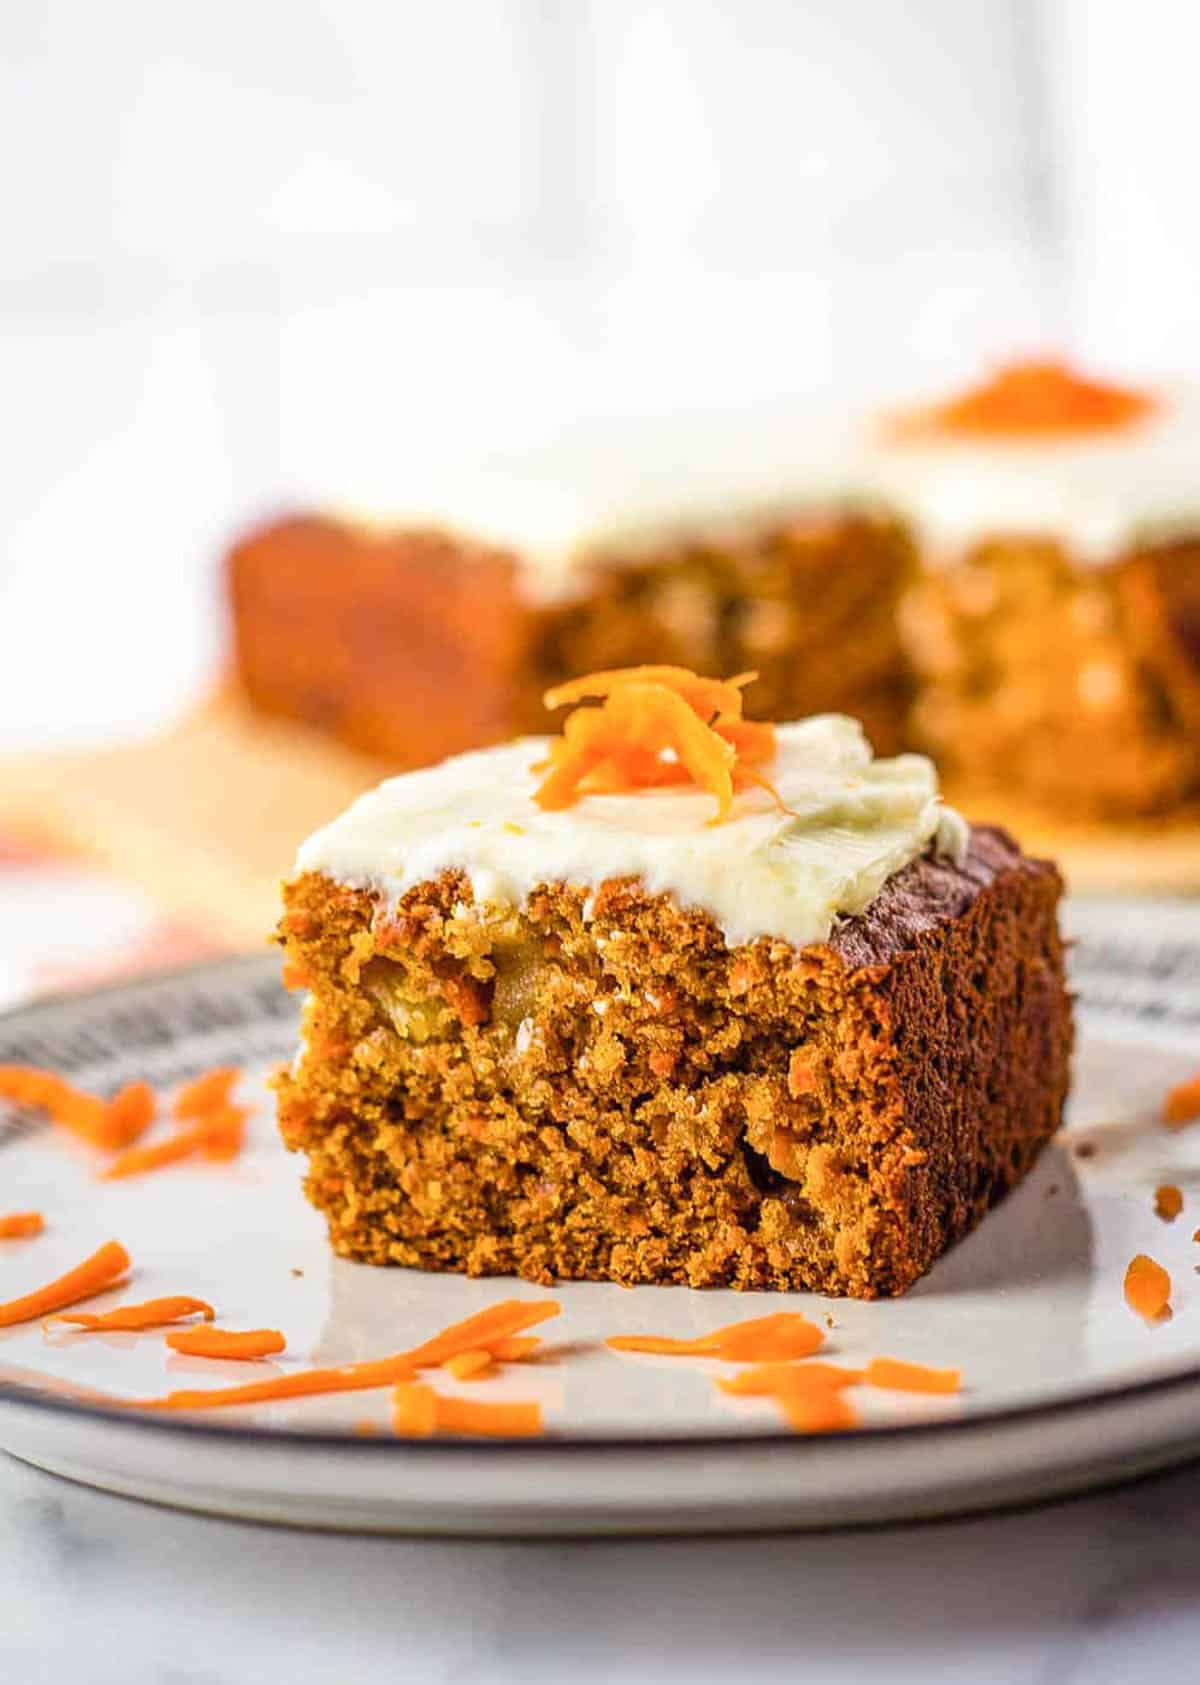 Slice of vegan carrot cake with vegan cream cheese frosting on a white plate.